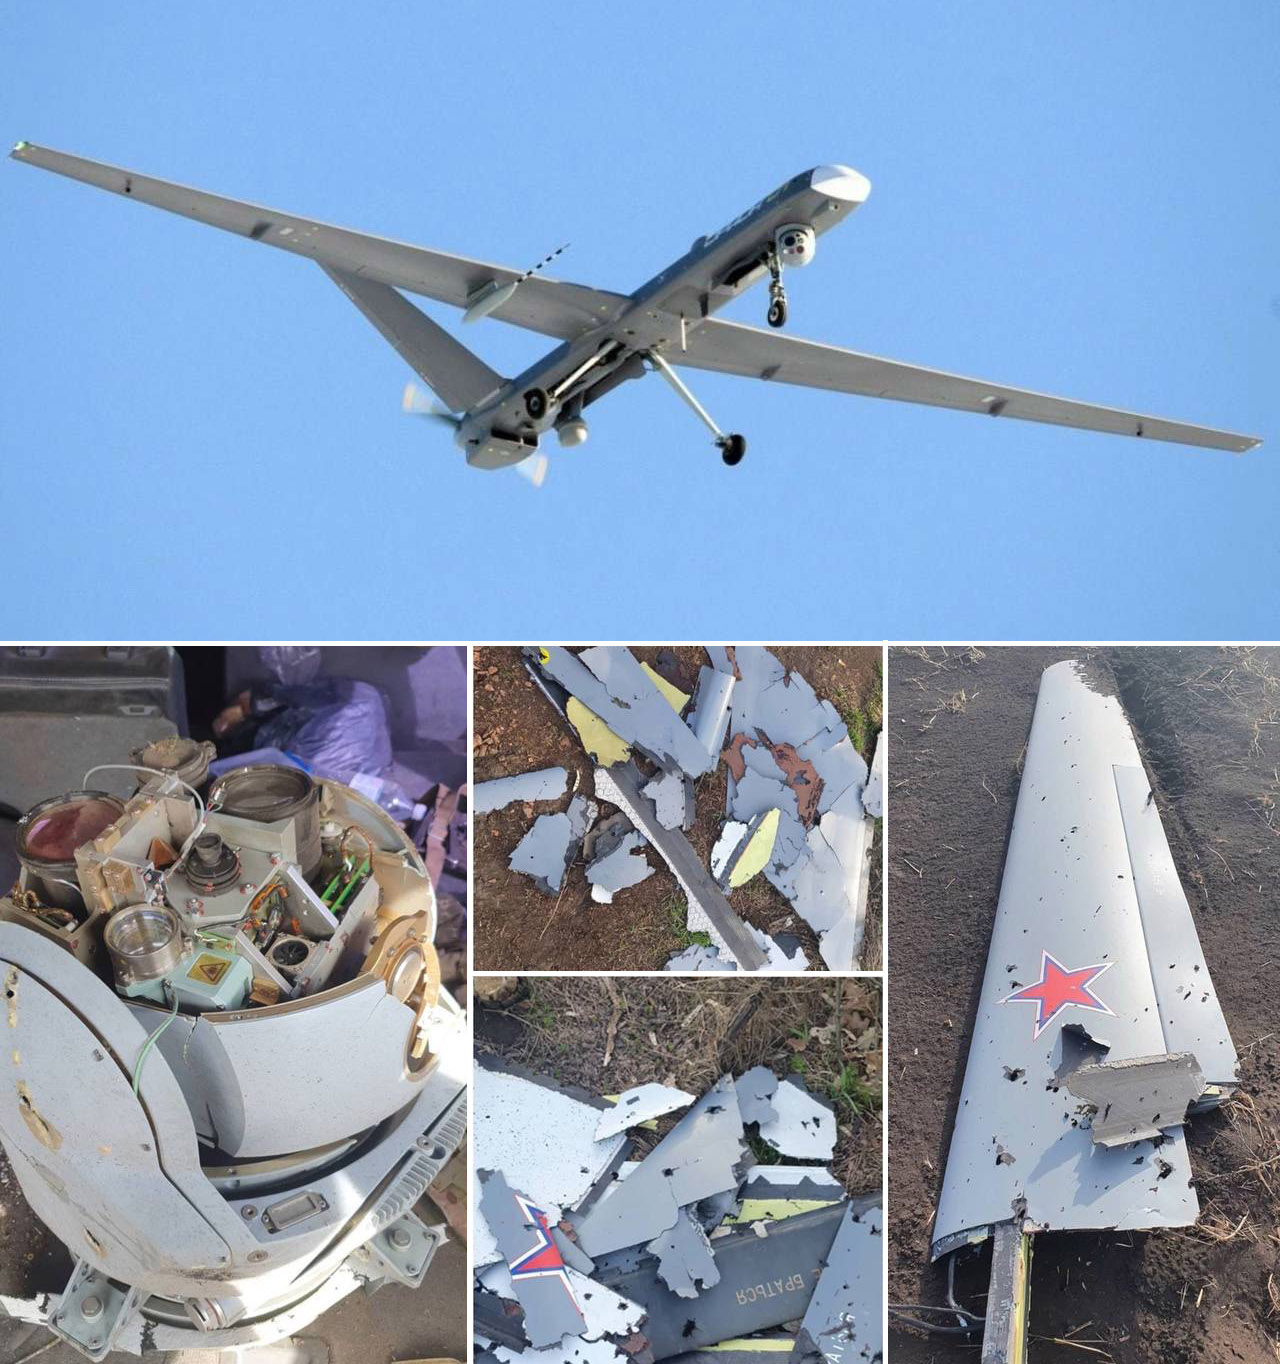 The Orion UAV, before and after the meeting with the Ukrainian military, In russia, They Took Their the Sirius UAV Into the Air for the First Time, Defense Express